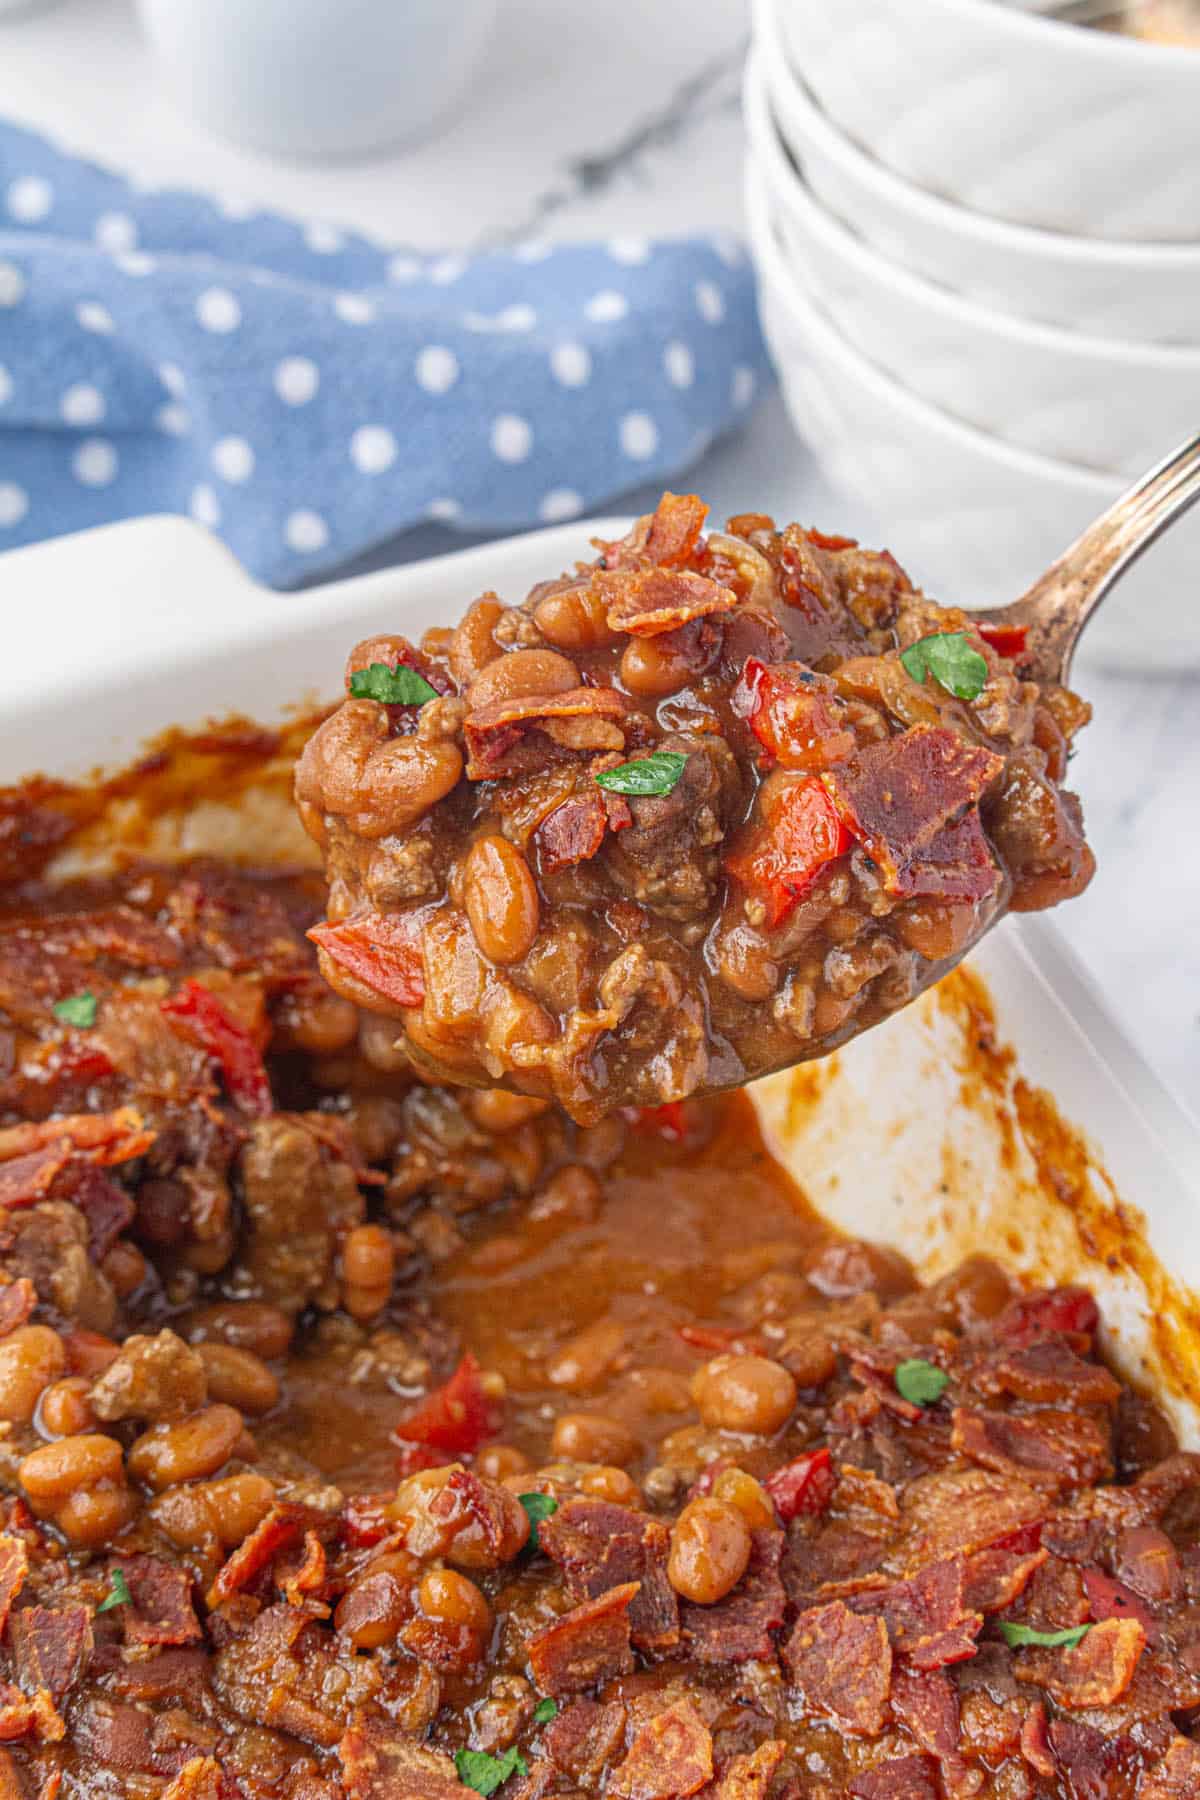 Brown sugar baked beans in a casserole dish. A serving spoon is scooping some out.